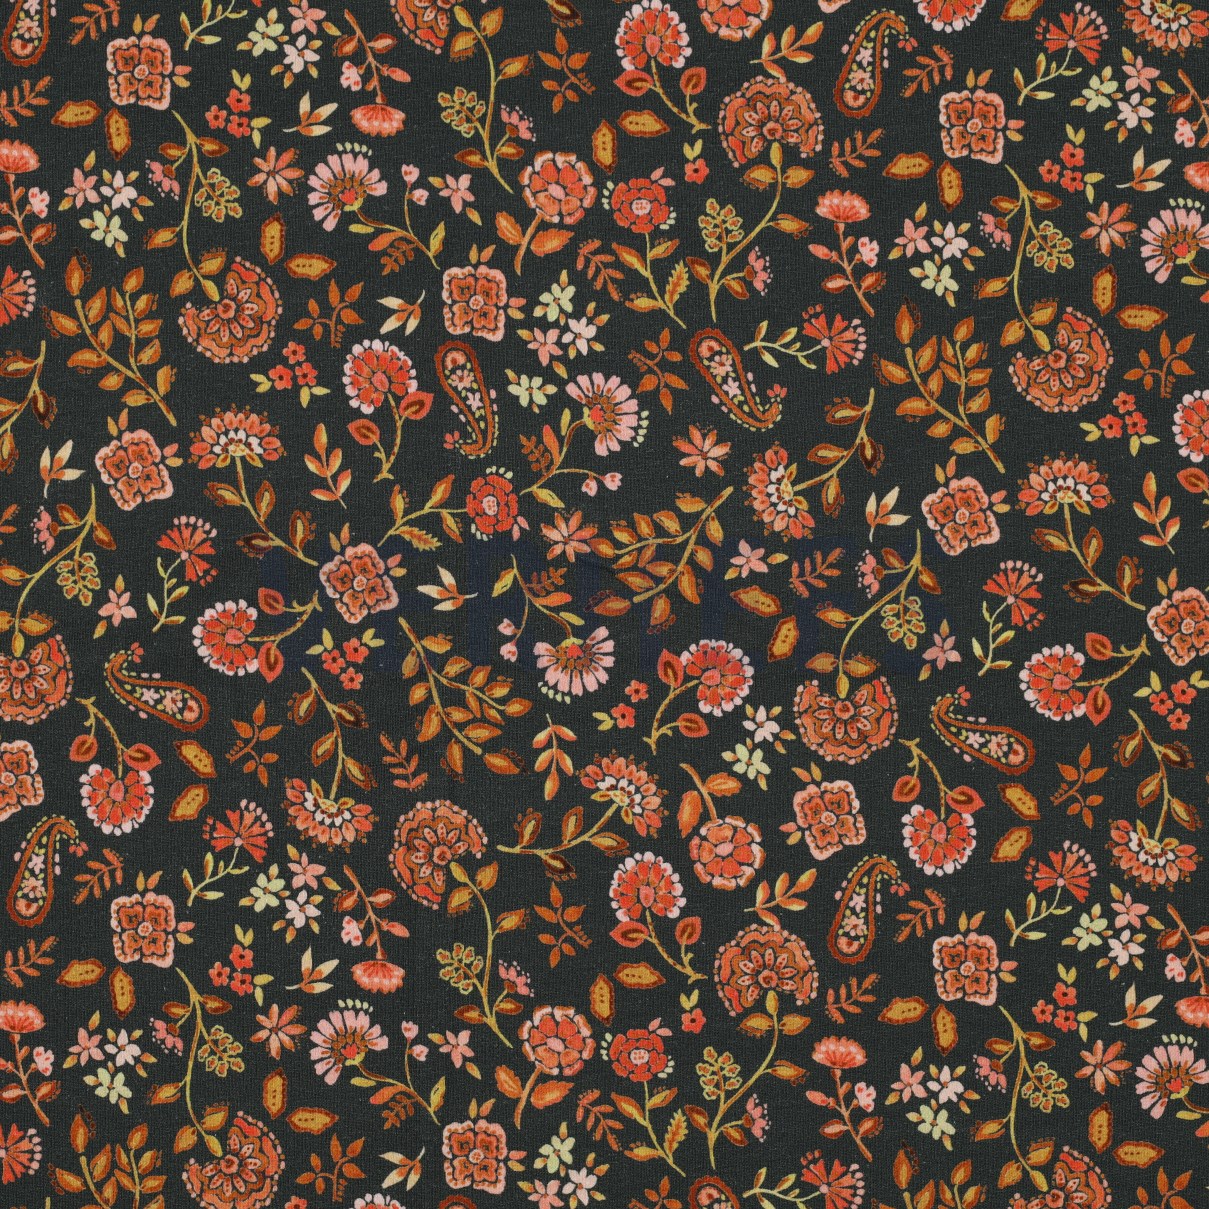 JERSEY DIGITAL PAISLEY FLOWERS ARMY GREEN (high resolution)